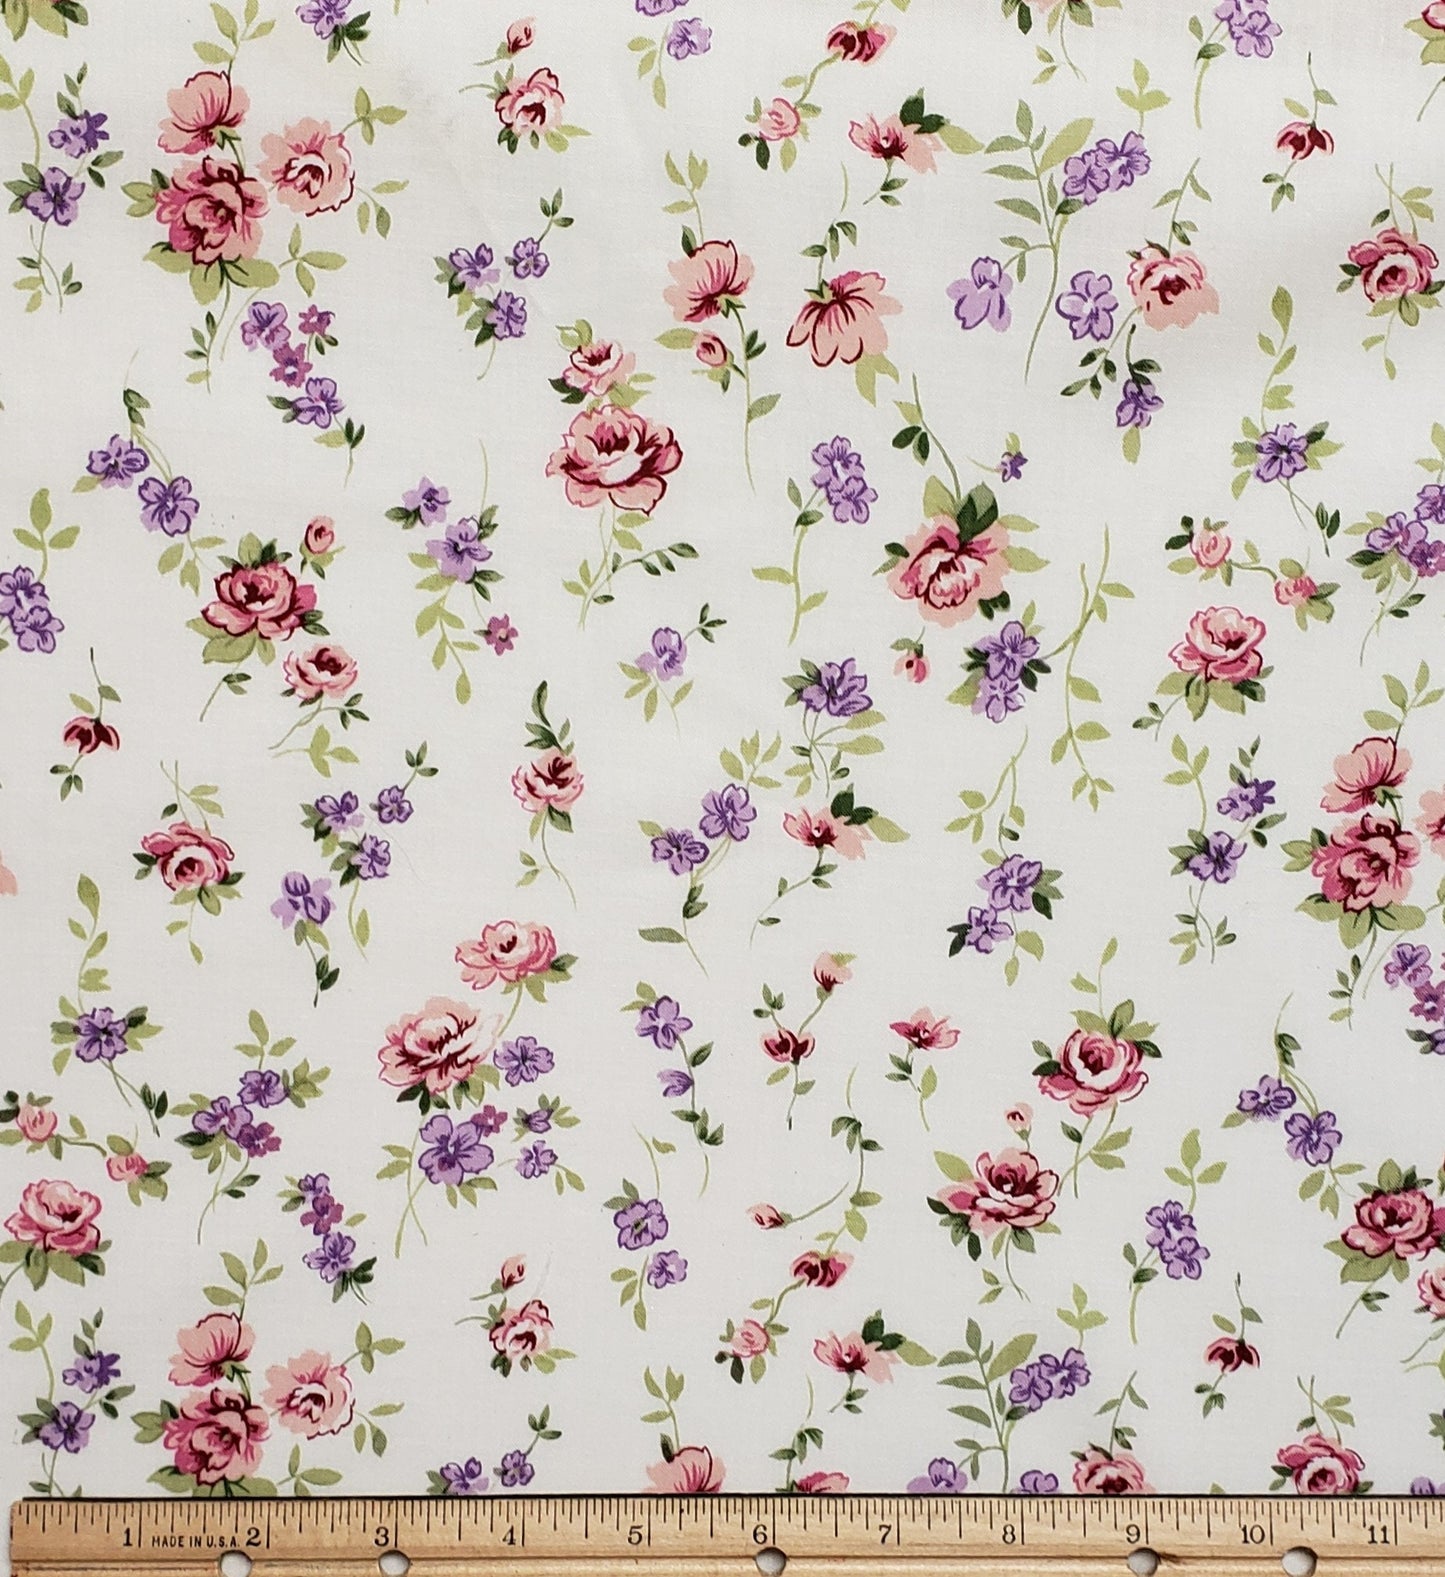 Designed and Produced Exclusively for JoAnn Fabric and Craft Stores - Ivory Fabric with Pink and Purple Flower Print